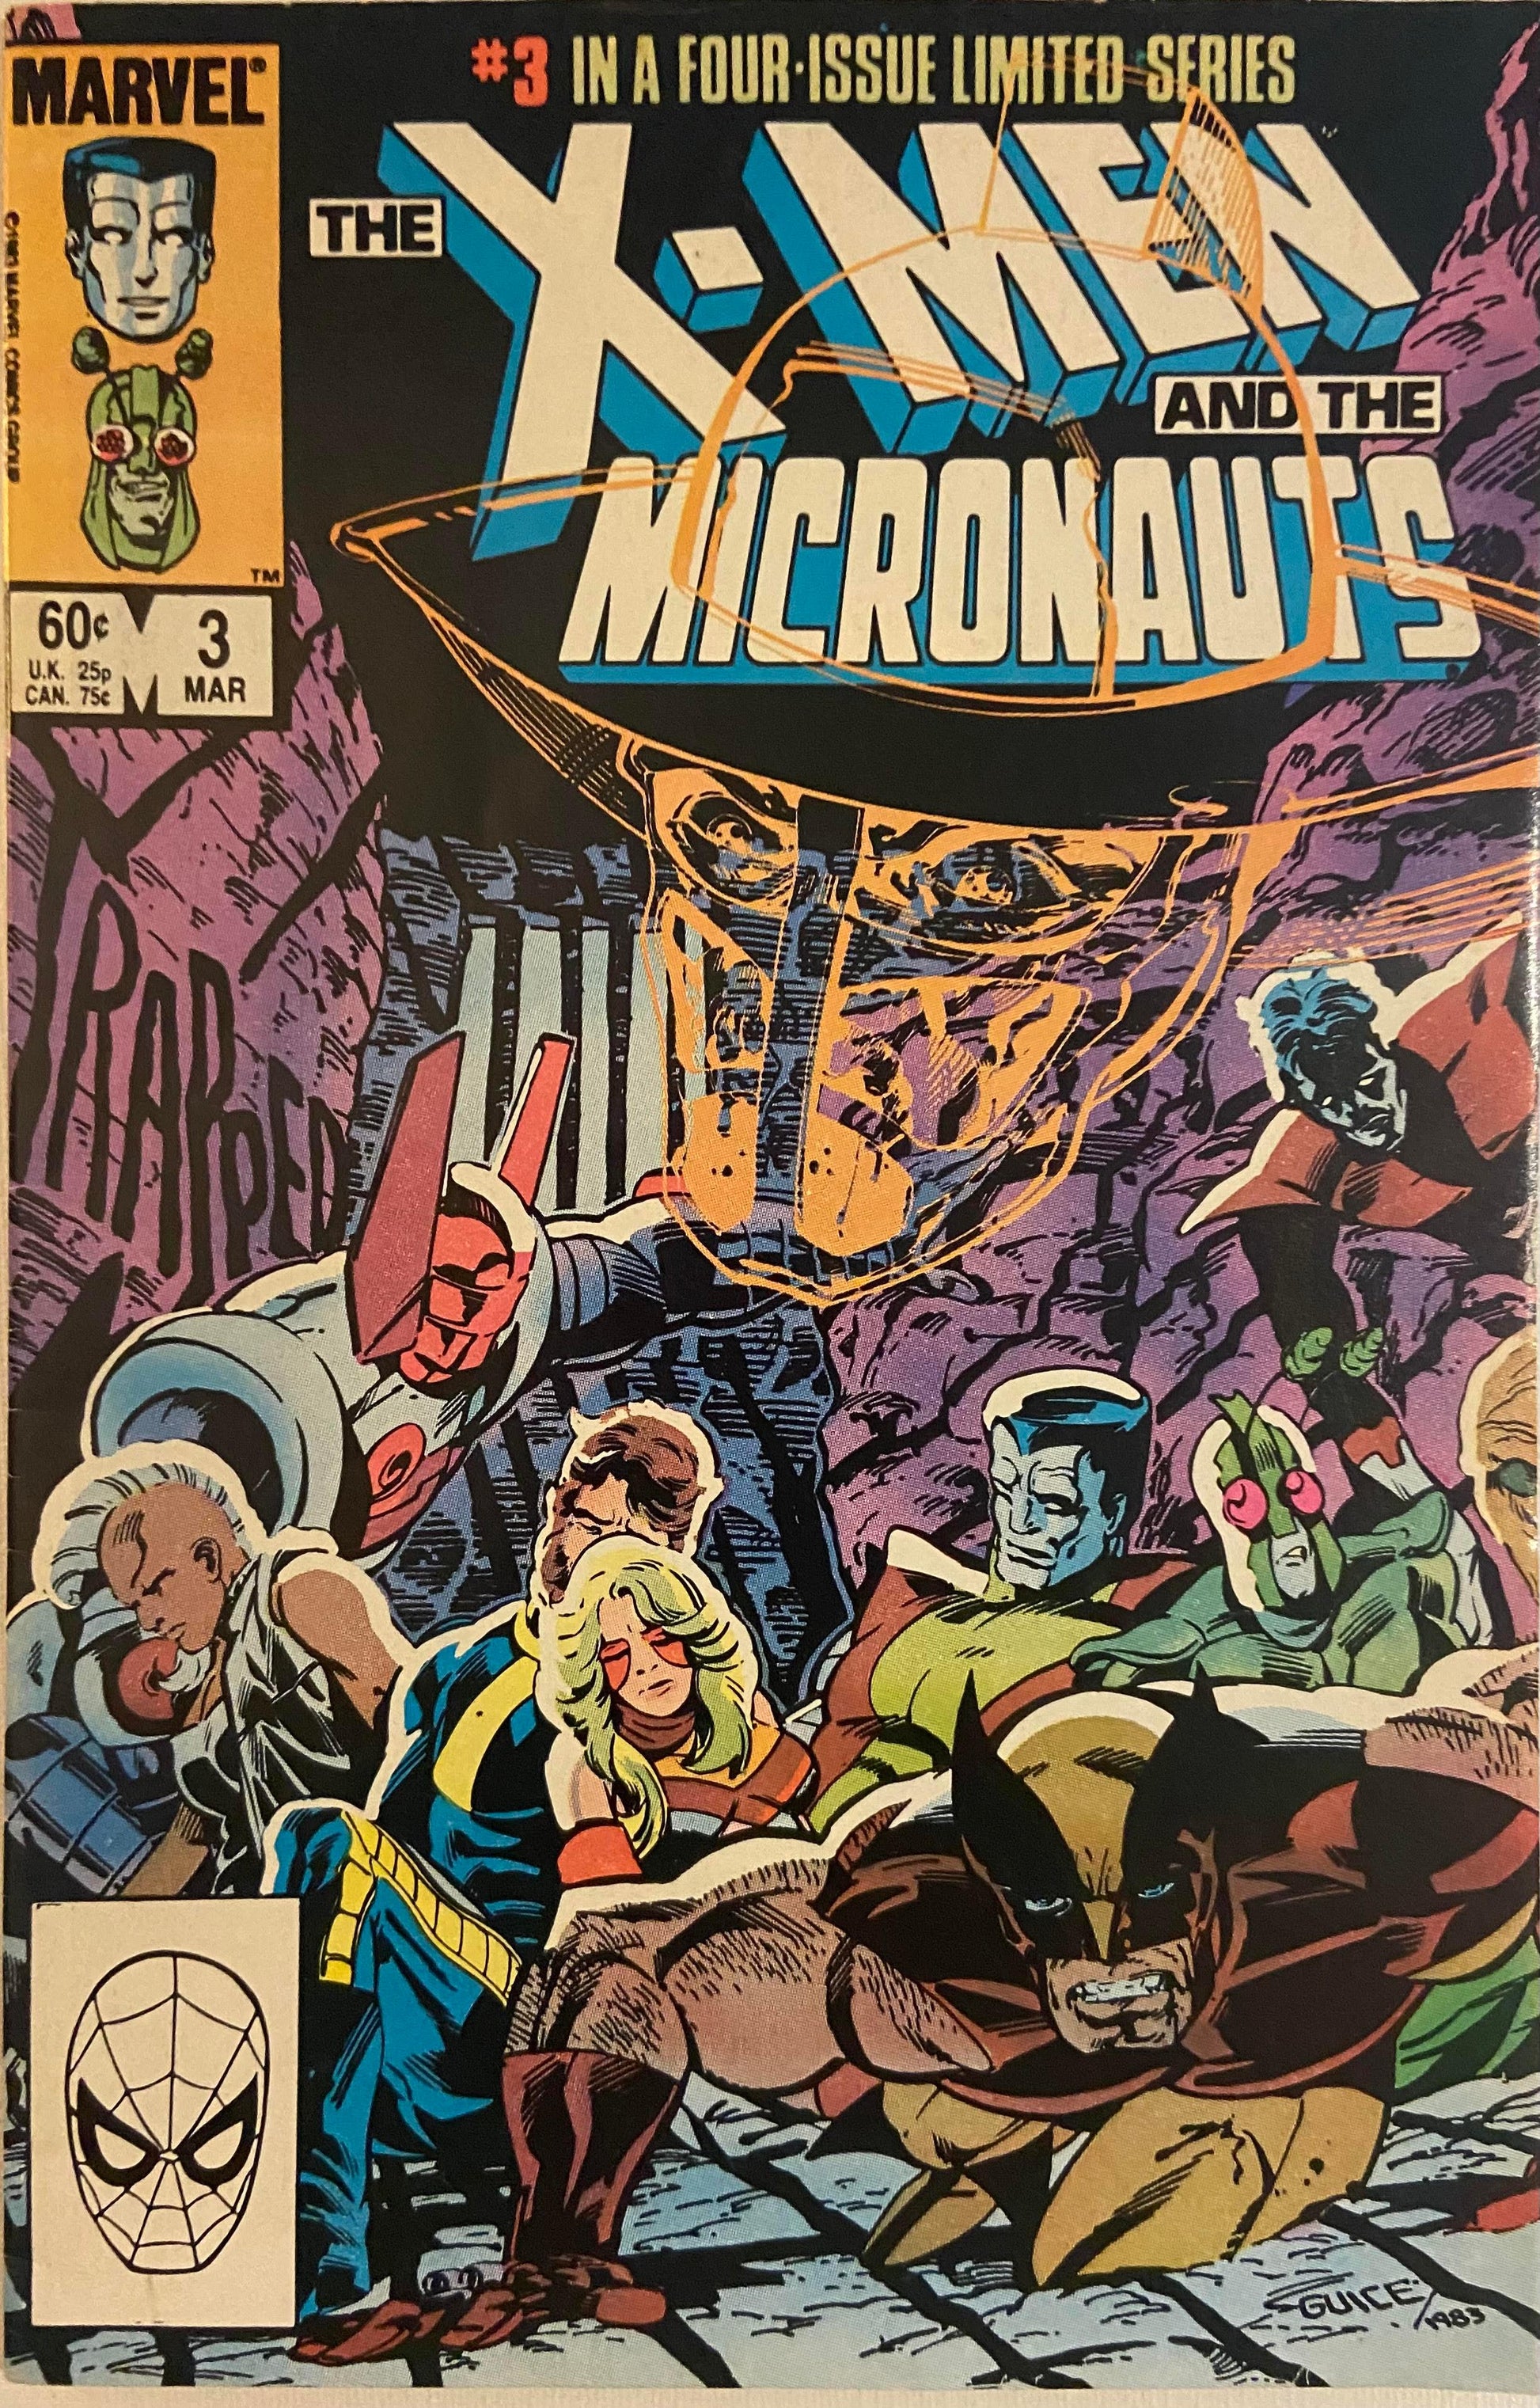 The X-Men and the Micronauts #3 - HolyGrail Comix